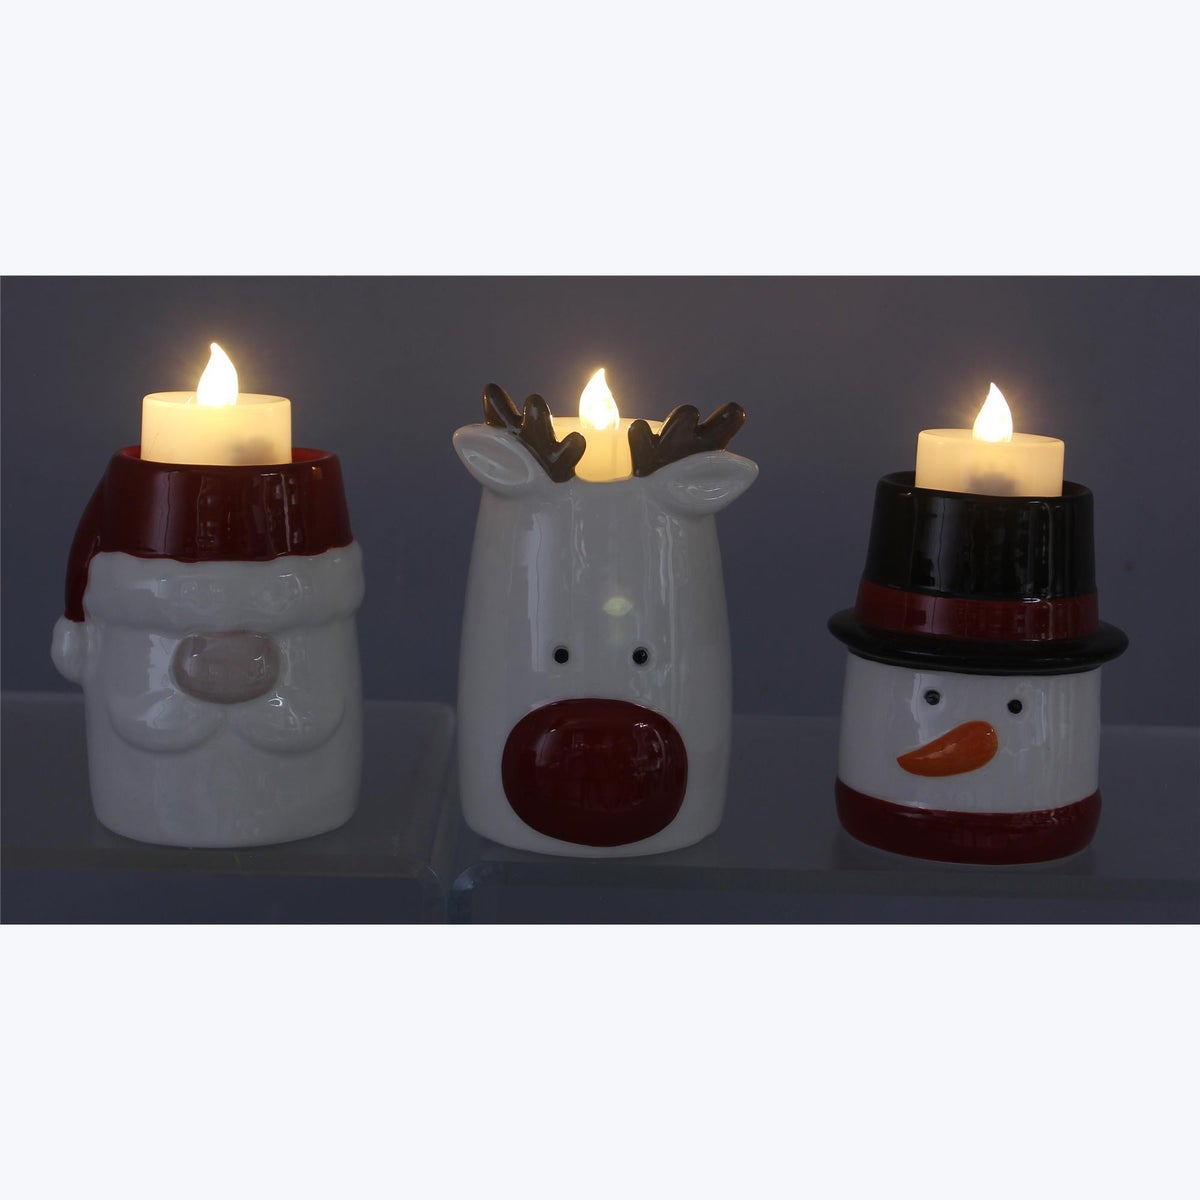 Ceramic Traditional Christmas Tea Light Candle Holder with Tealight, 3 Ast